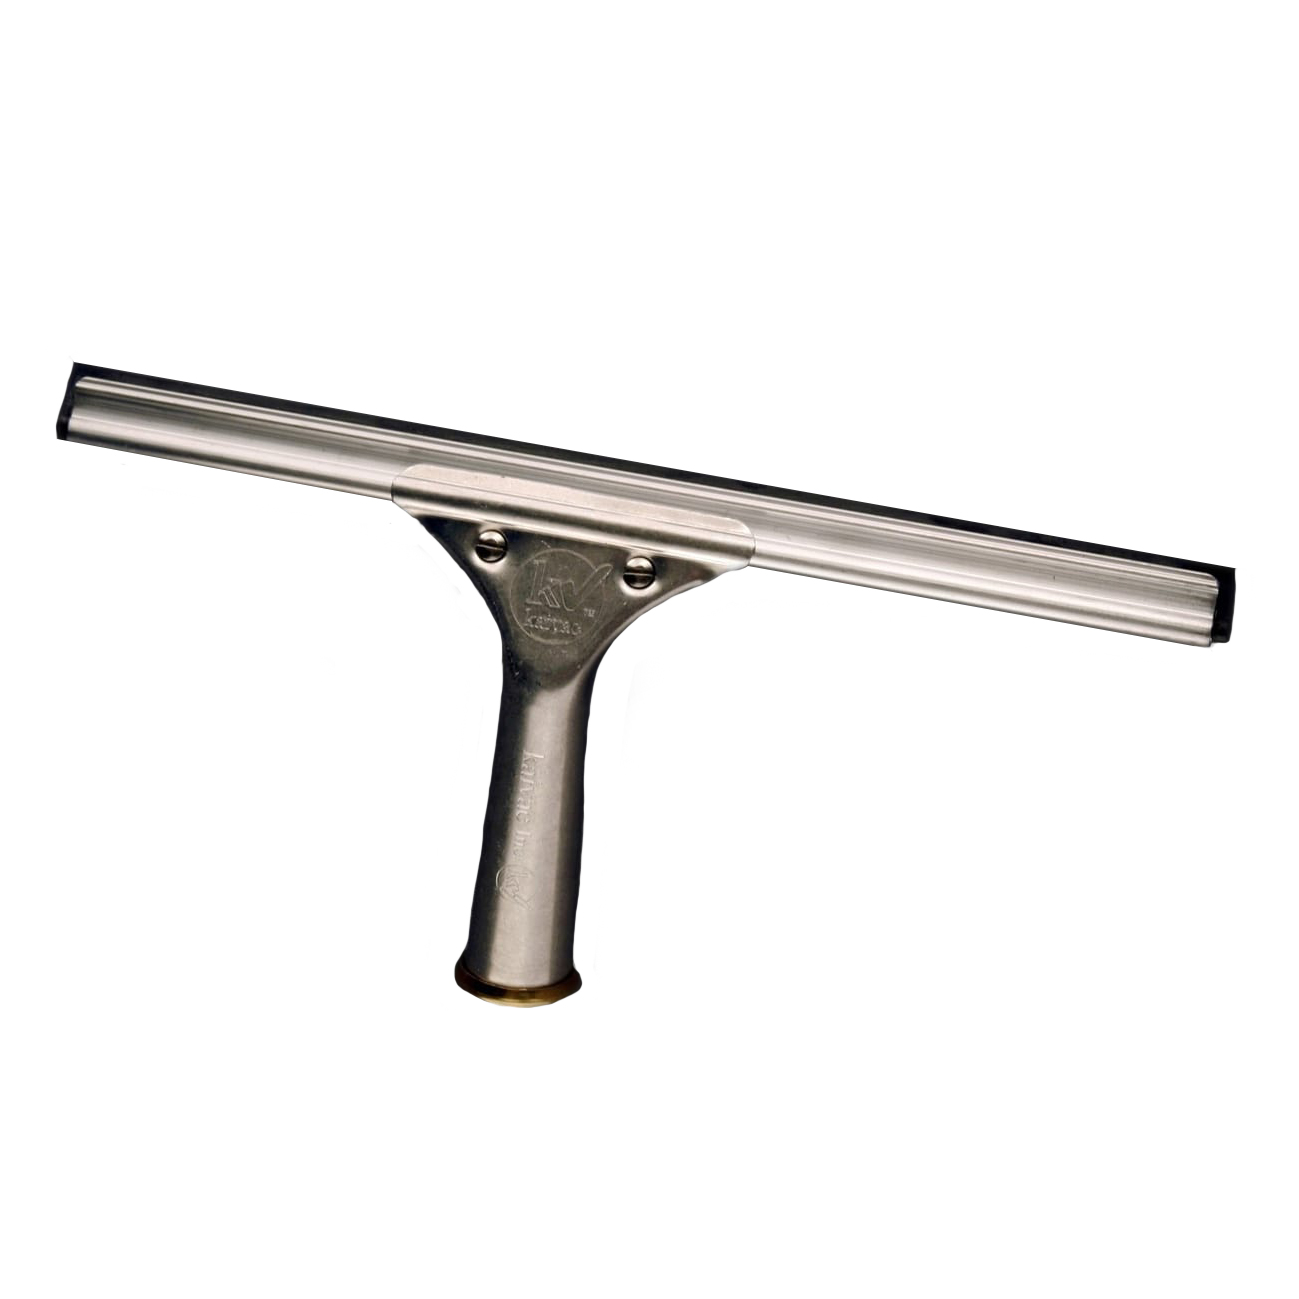 12 Stainless Steel Window Cleaning Squeegee